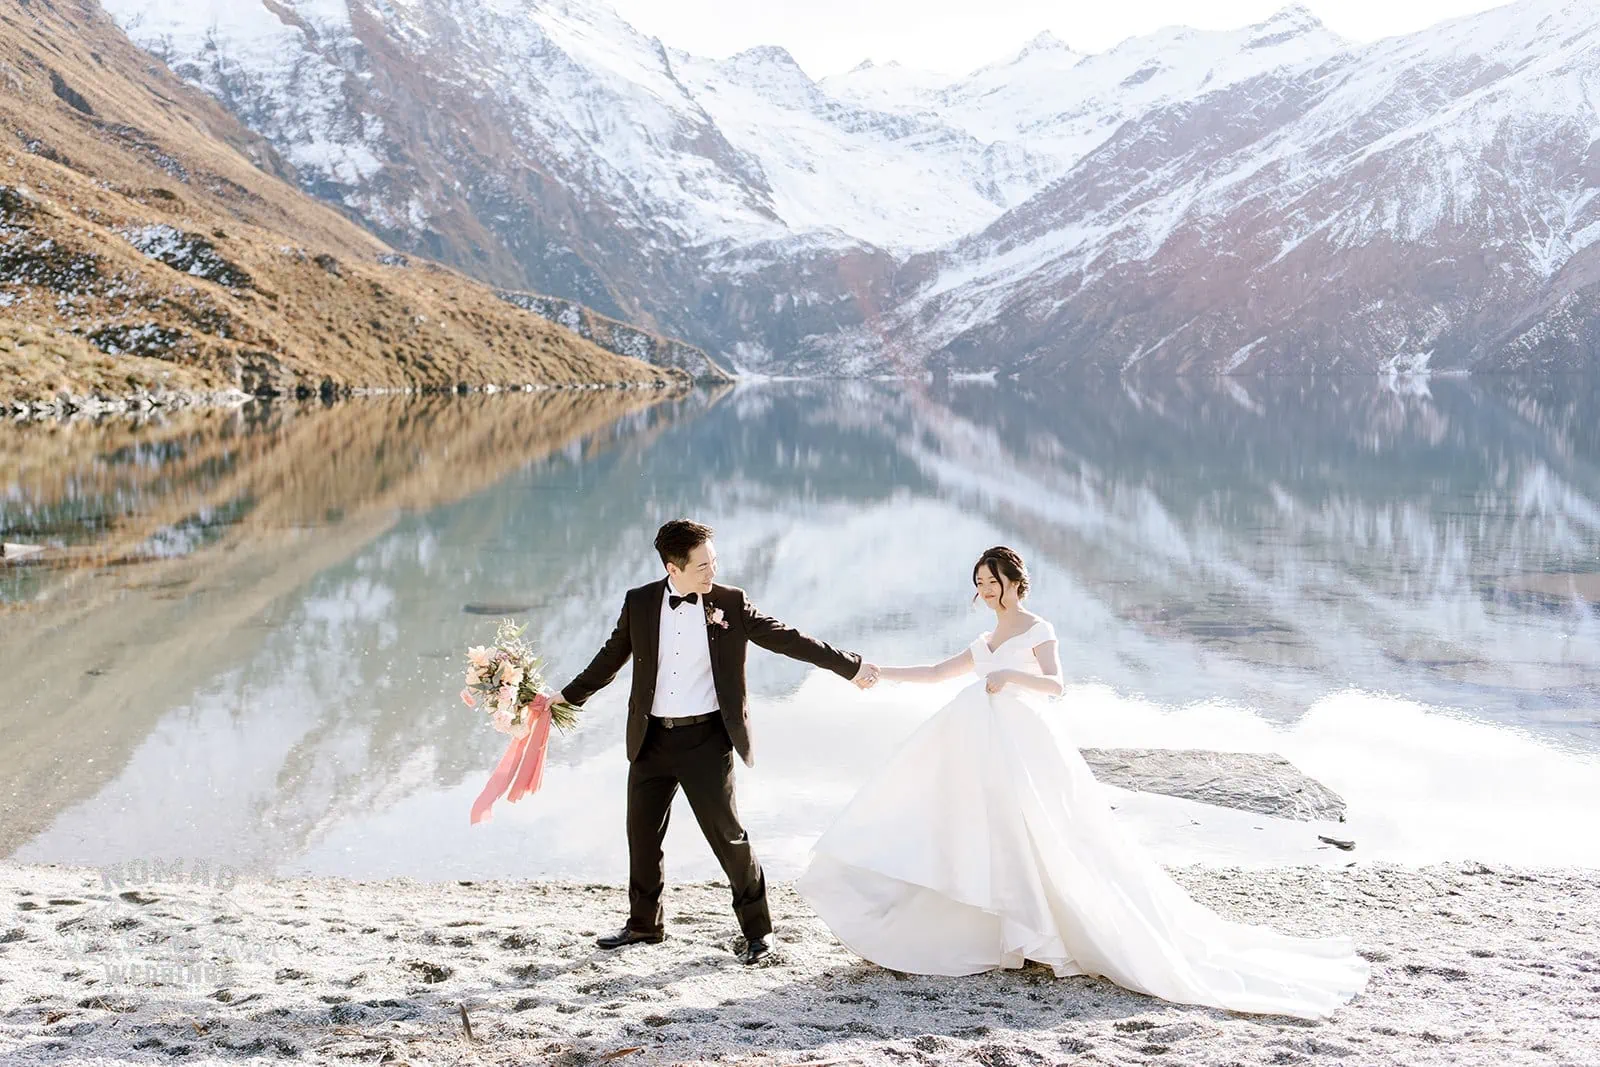 Queenstown New Zealand Elopement Wedding Photographer - Bo and Junyi's Heli Pre Wedding Shoot amidst picturesque mountains and a serene lake.